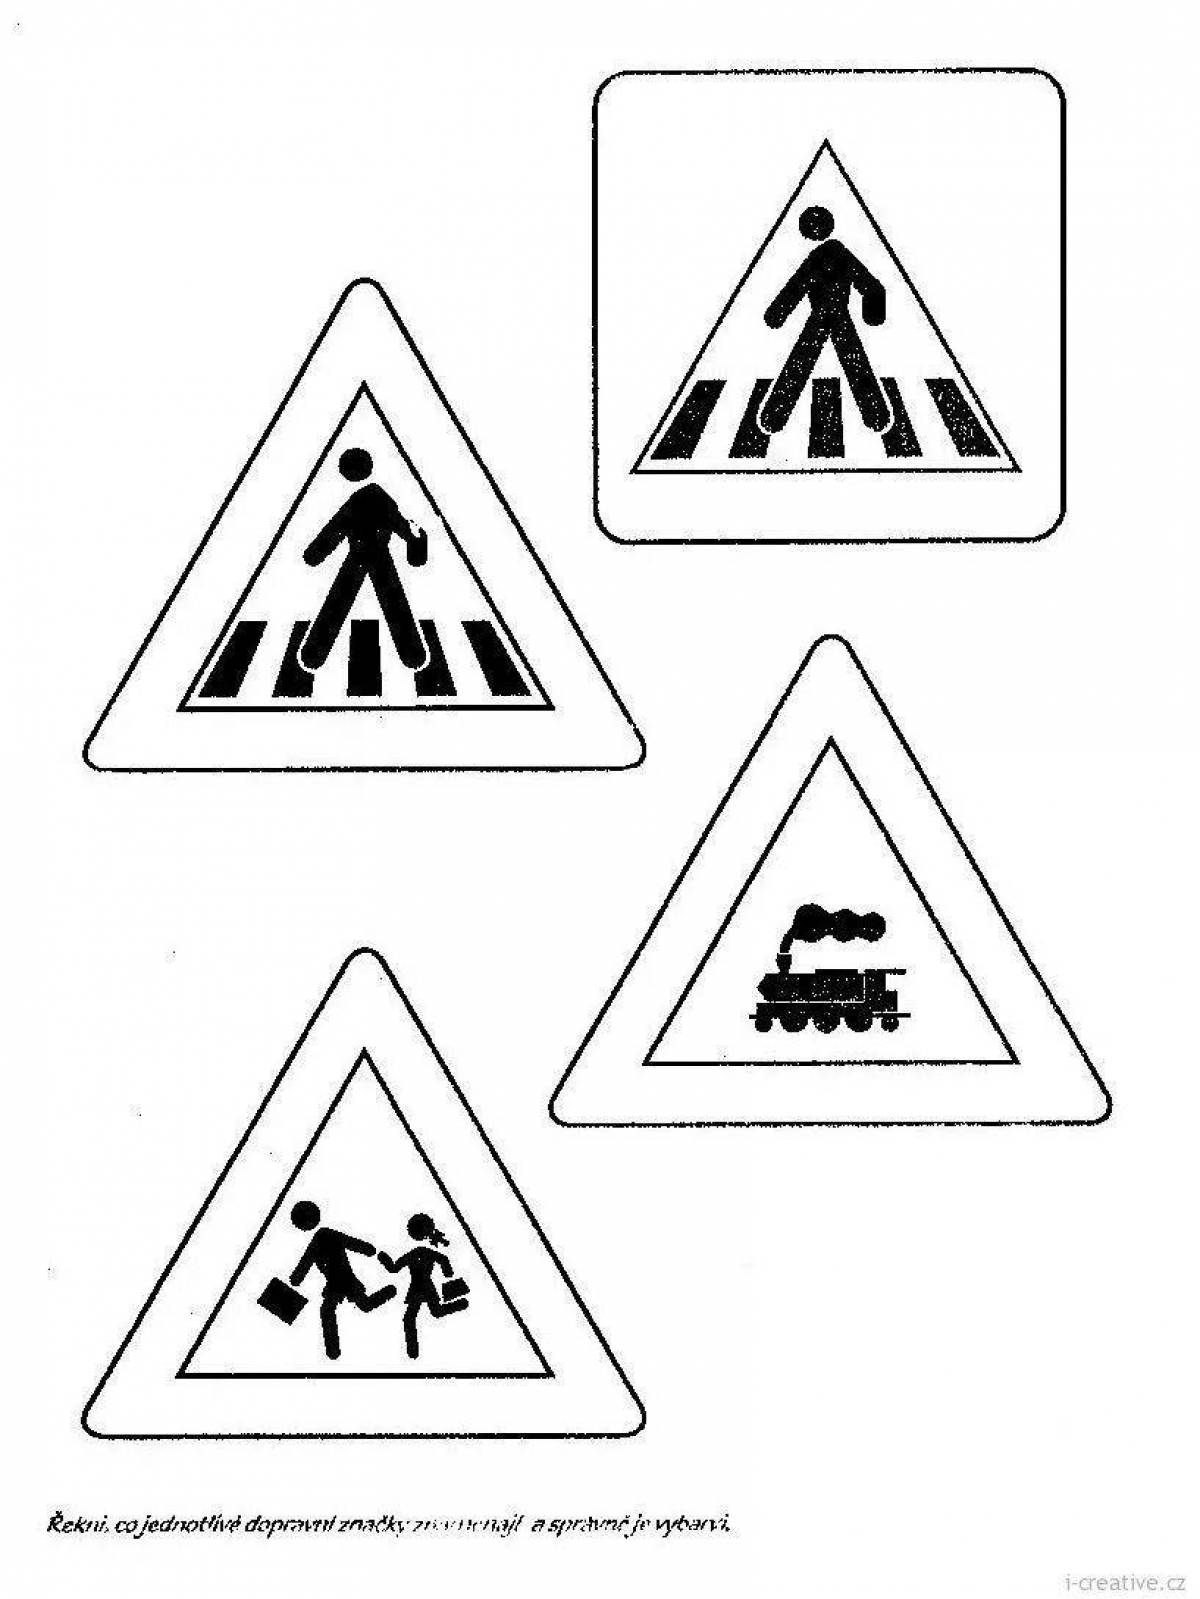 Coloring page provocative road signs